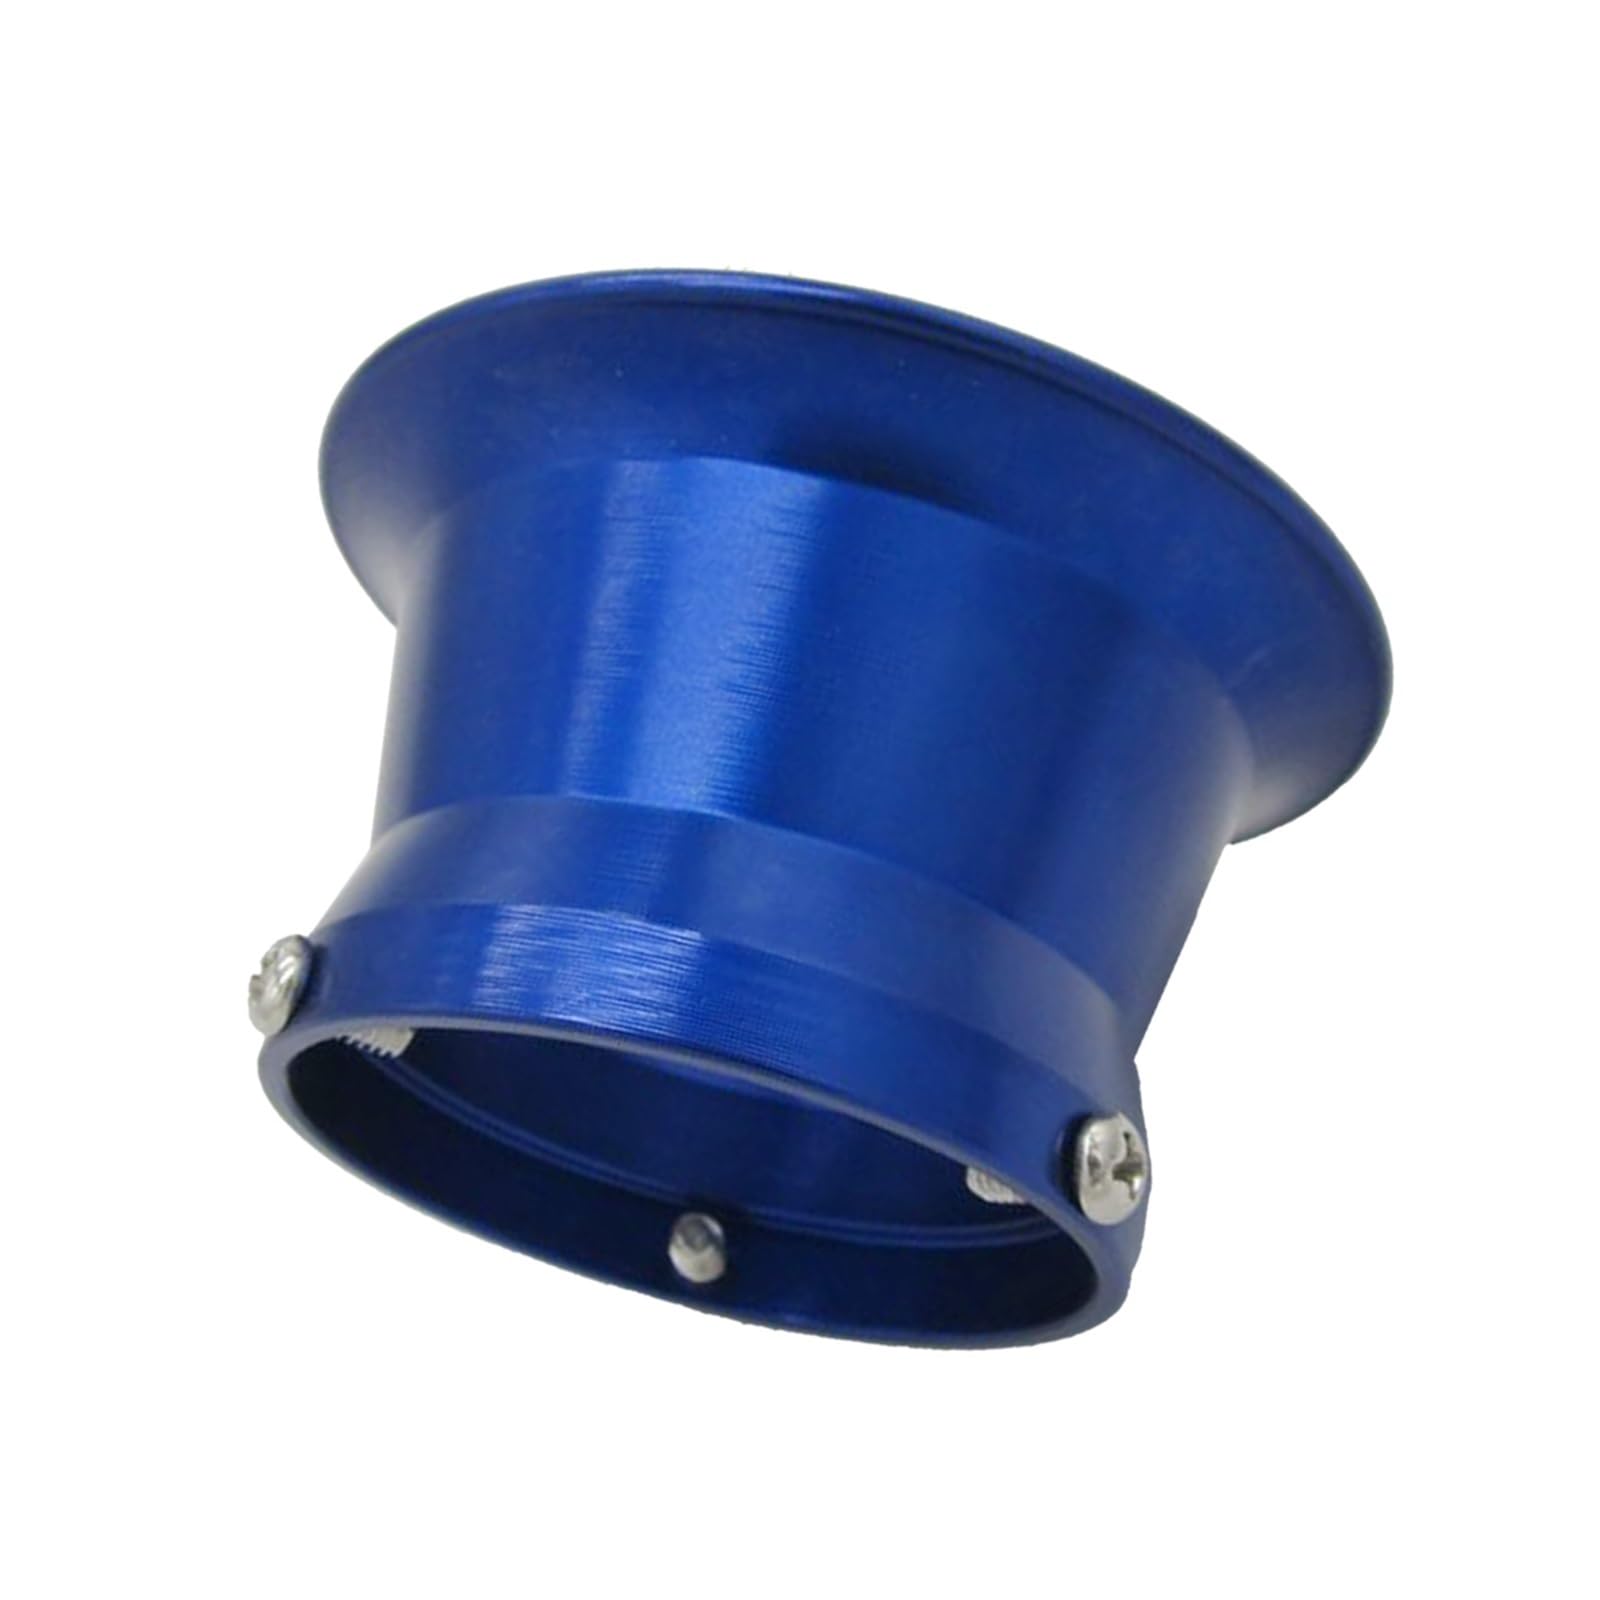 ZXHNB 50mm Vergaser Air Wind Horn Cup Auto Ersatzteile Fit for Keihin Fit for OKO Fit for KOSO Fit for PWK24-30 (Color : Blue) von ZXHNB